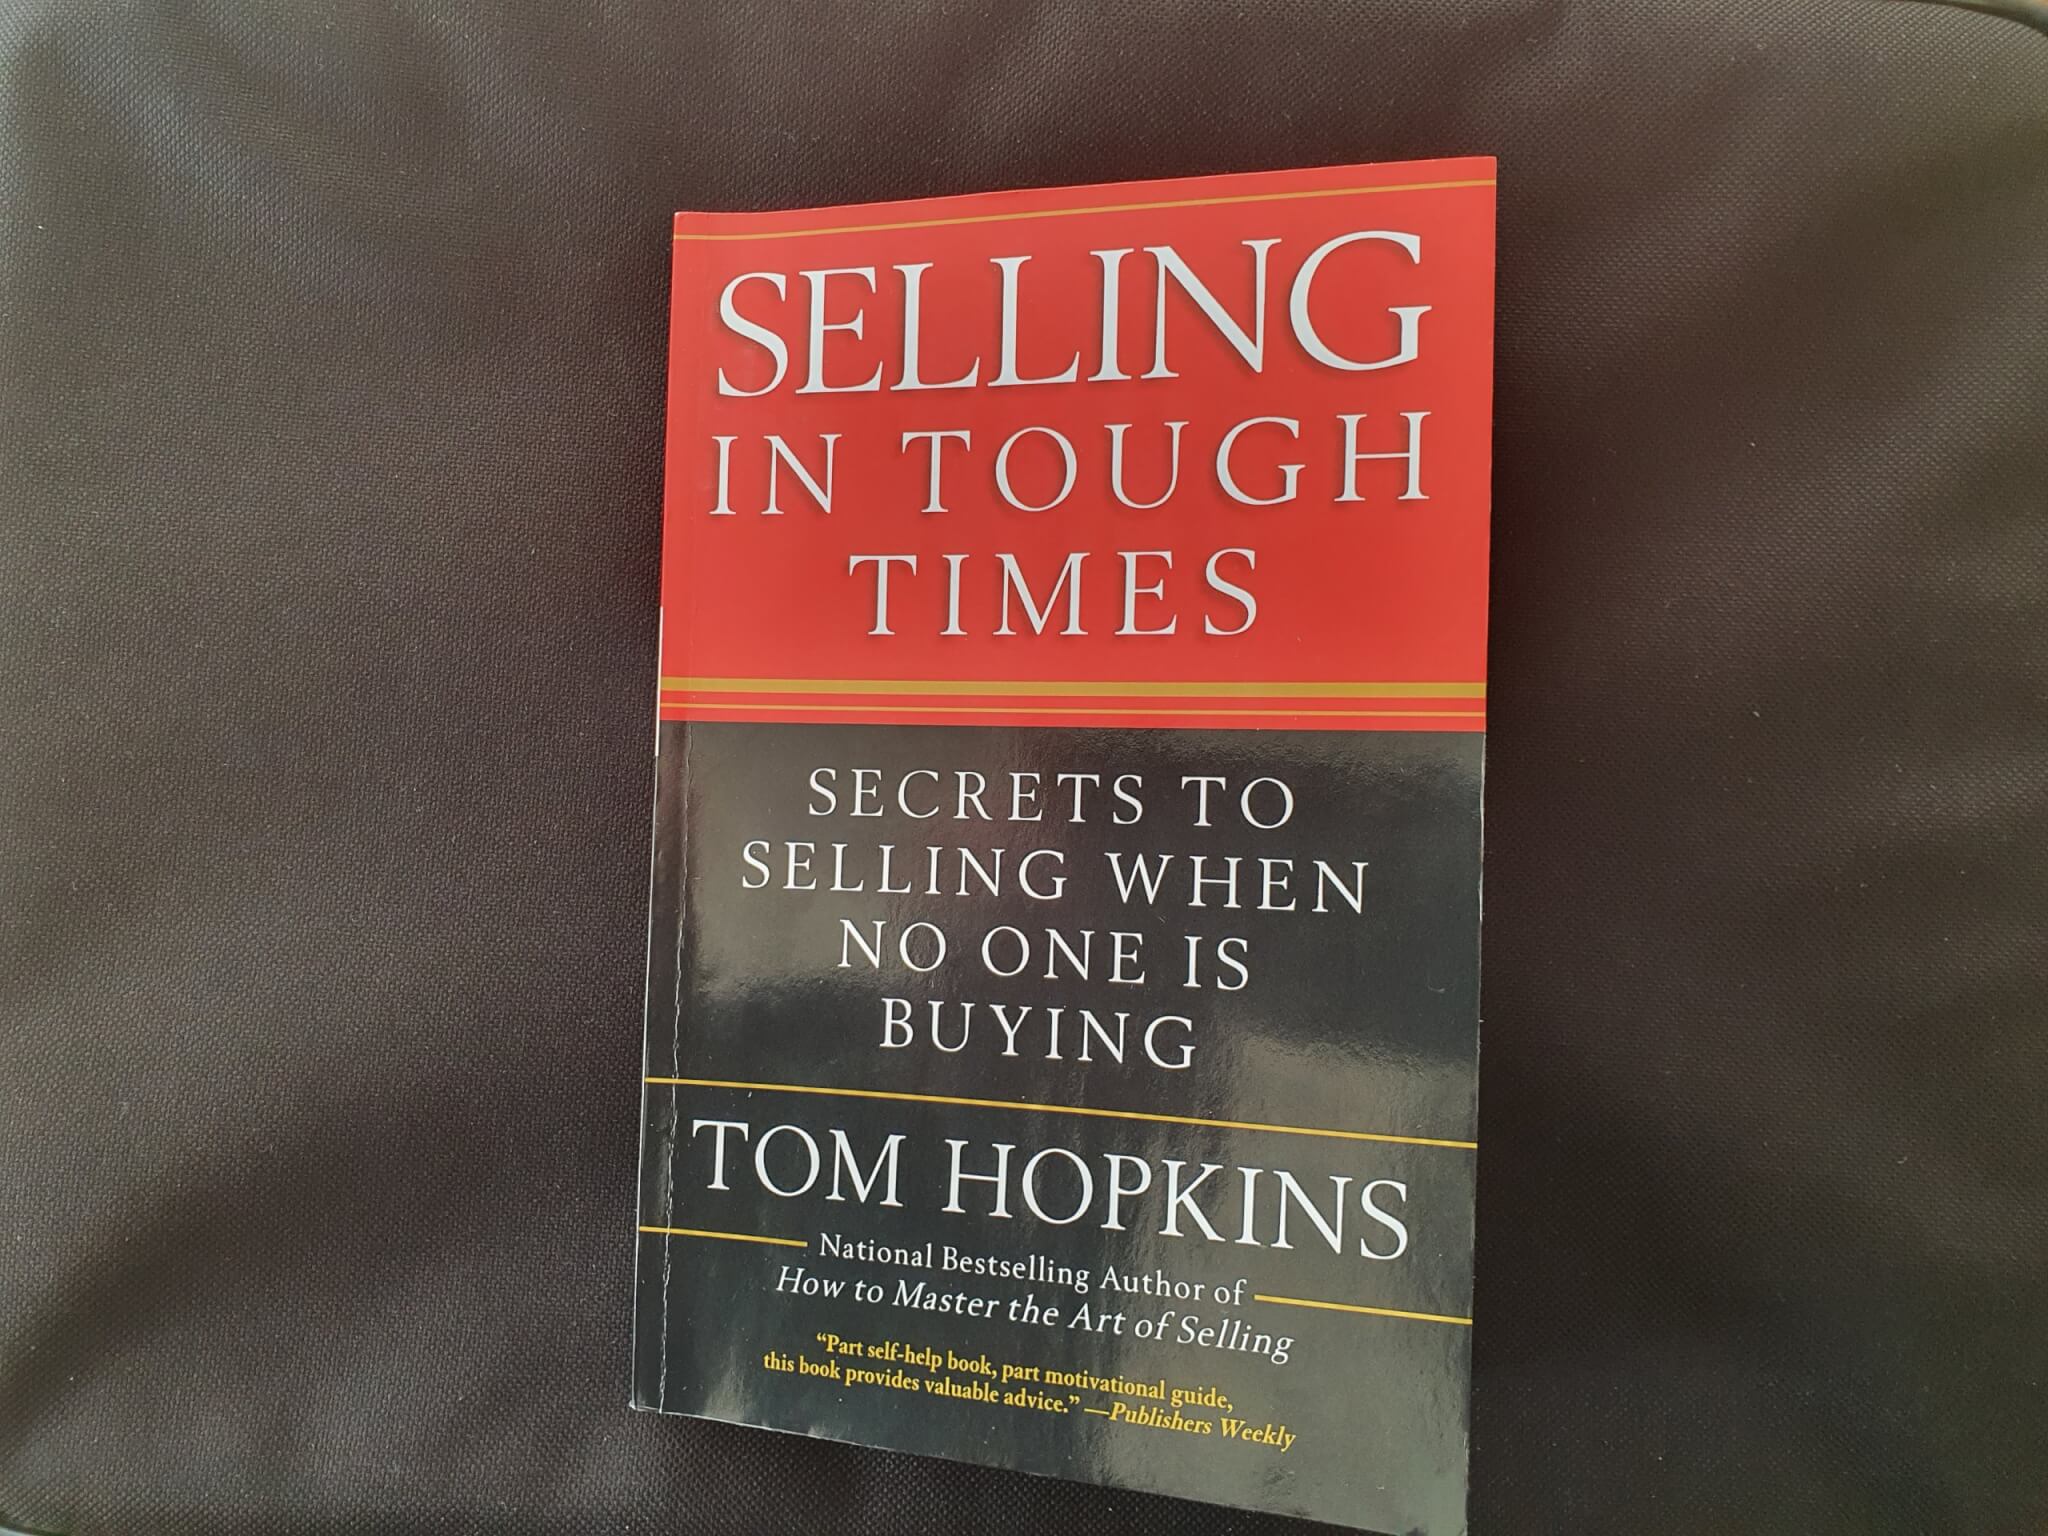 Magnify Consulting - Selling in Tough Times by Tom Hopkins